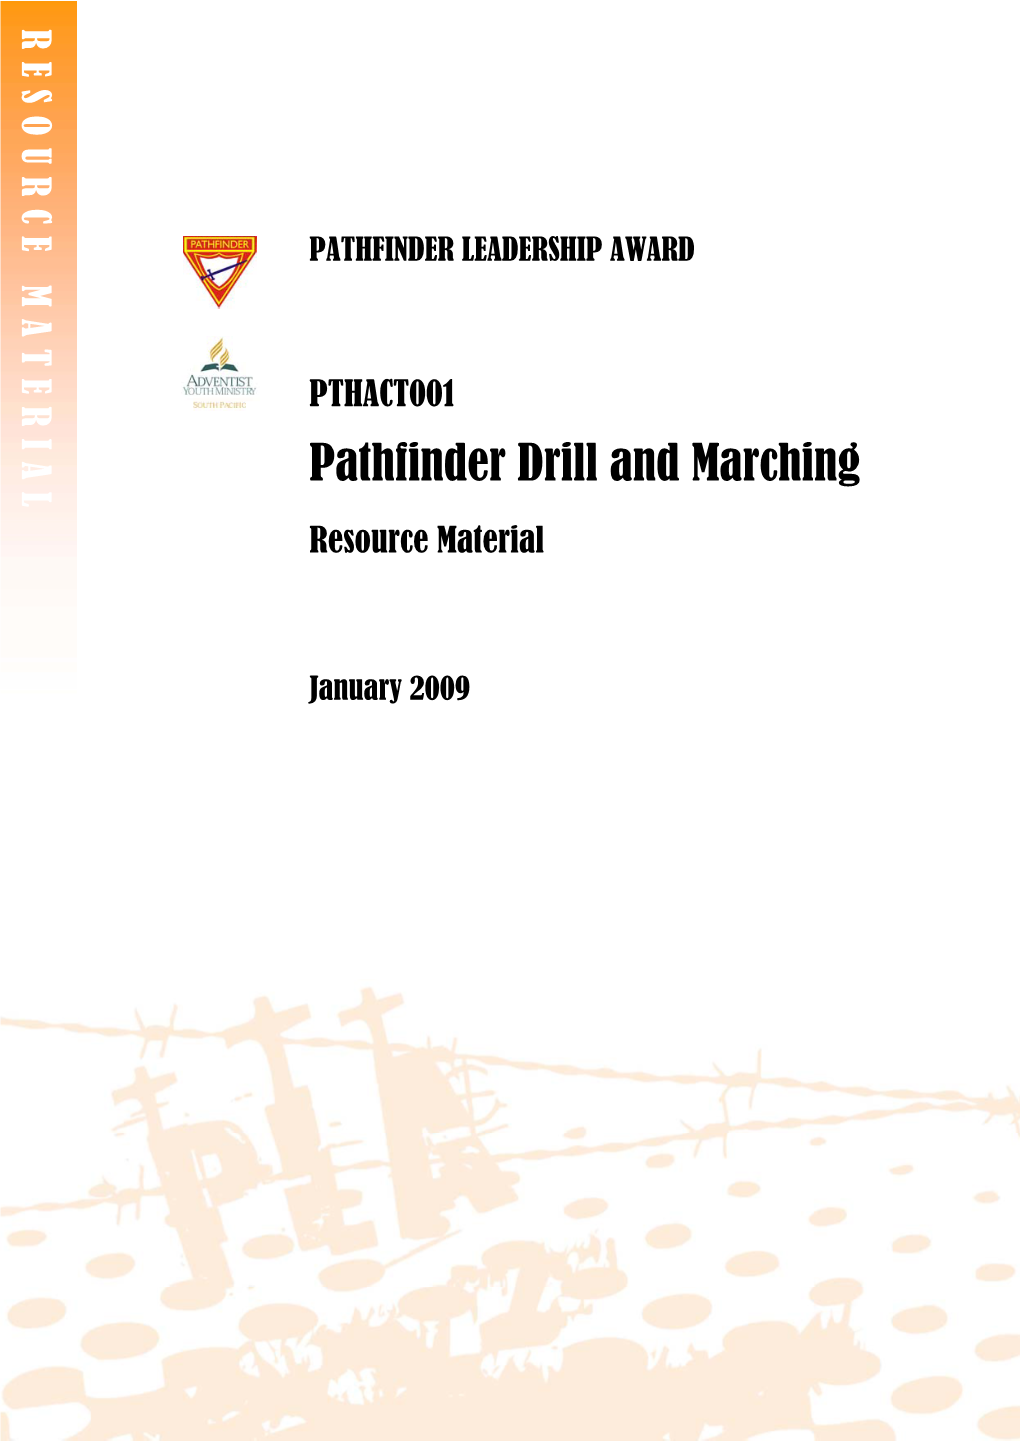 Pathfinder Drill and Marching | Resource Material